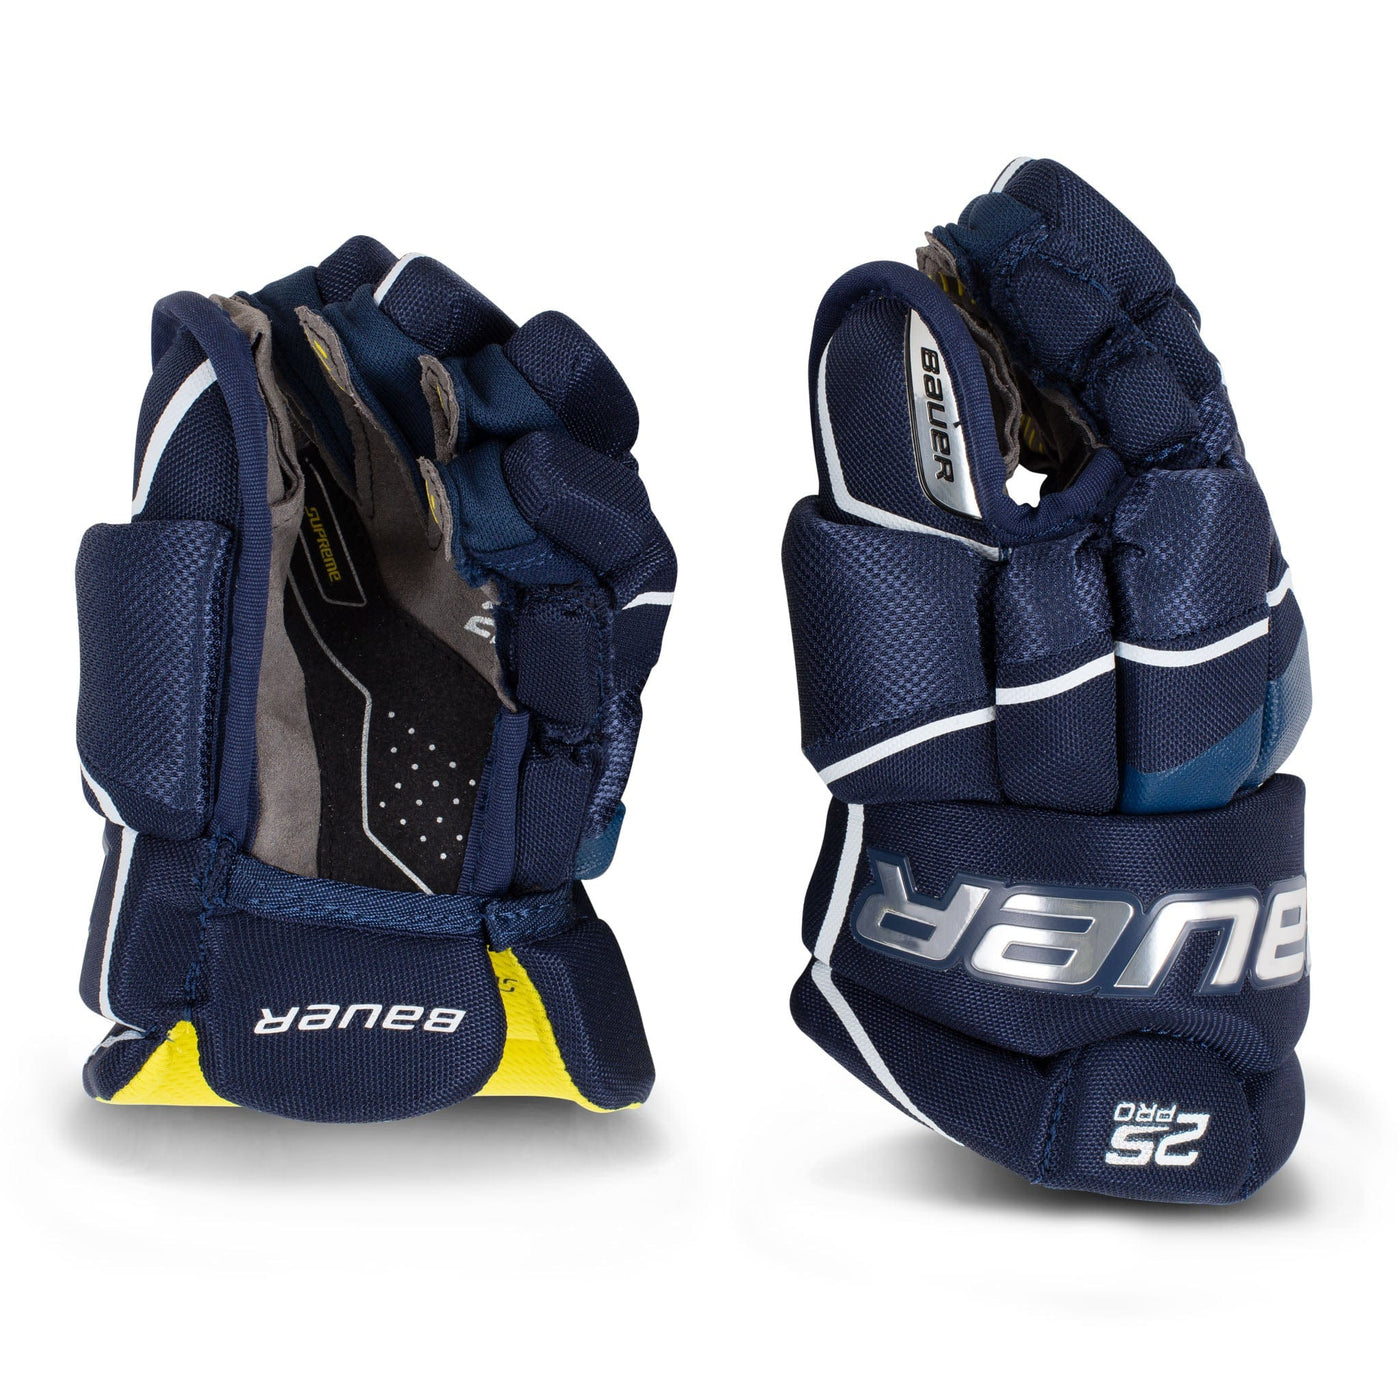 Bauer Supreme 2S Pro Youth Hockey Gloves